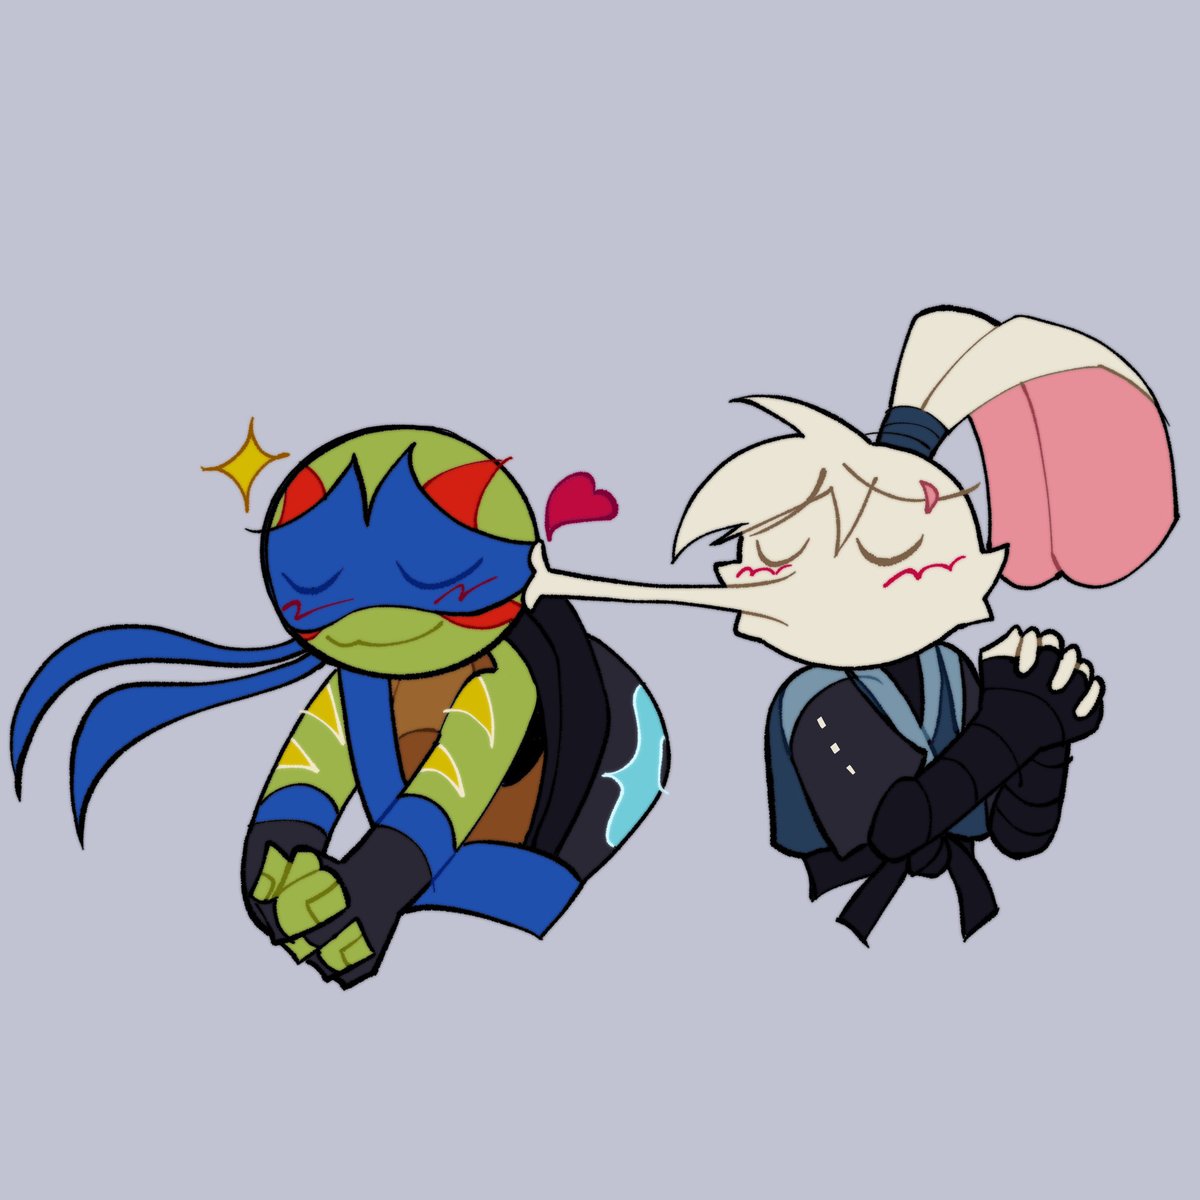 Sorry if I don’t post for a bit. Things are getting kinda rough rn so I don’t have much time on my hands. So take these sillies instead :) #leosagi #rottmntleo #yuichiusagi #leochi #rottmnt